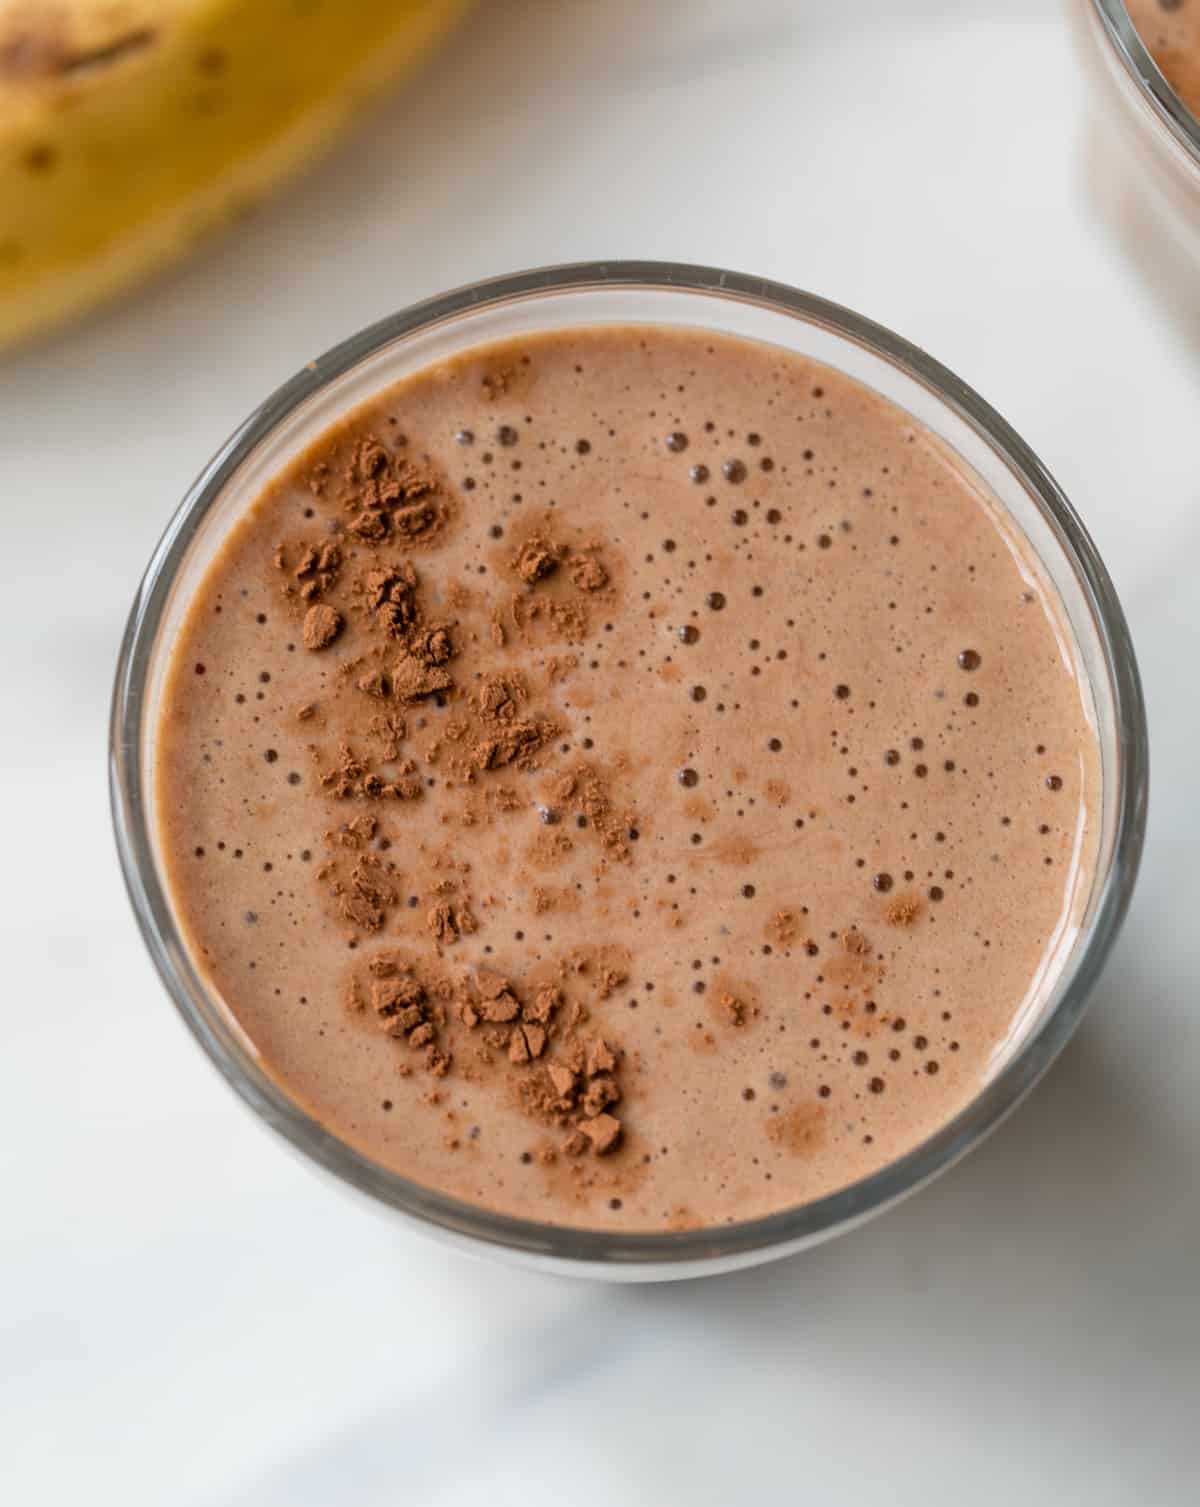 https://cleananddelicious.com/wp-content/uploads/2021/12/banana_pbfit_chocolate_protein_shake6.jpg